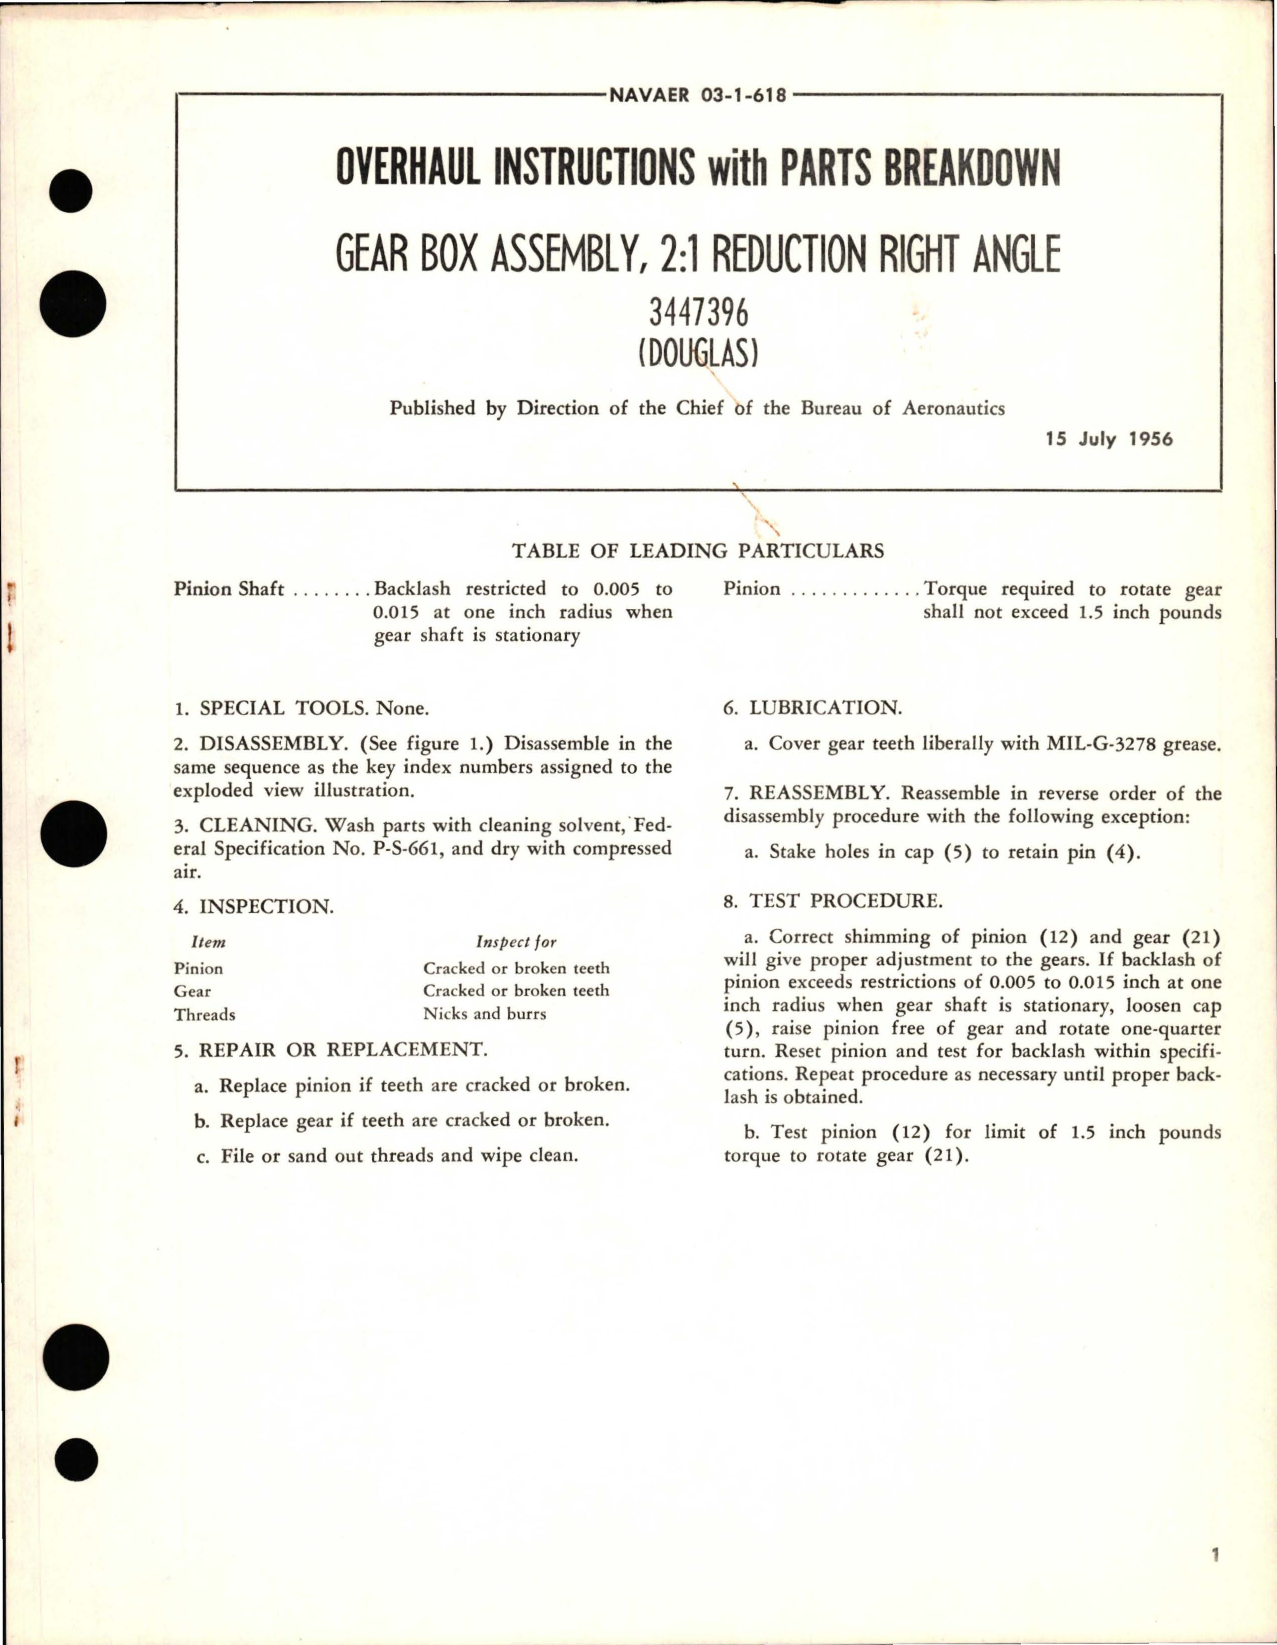 Sample page 1 from AirCorps Library document: Overhaul Instructions with Parts Breakdown for Reduction 2:1 Right Angle Gear Box Assembly - 3447396